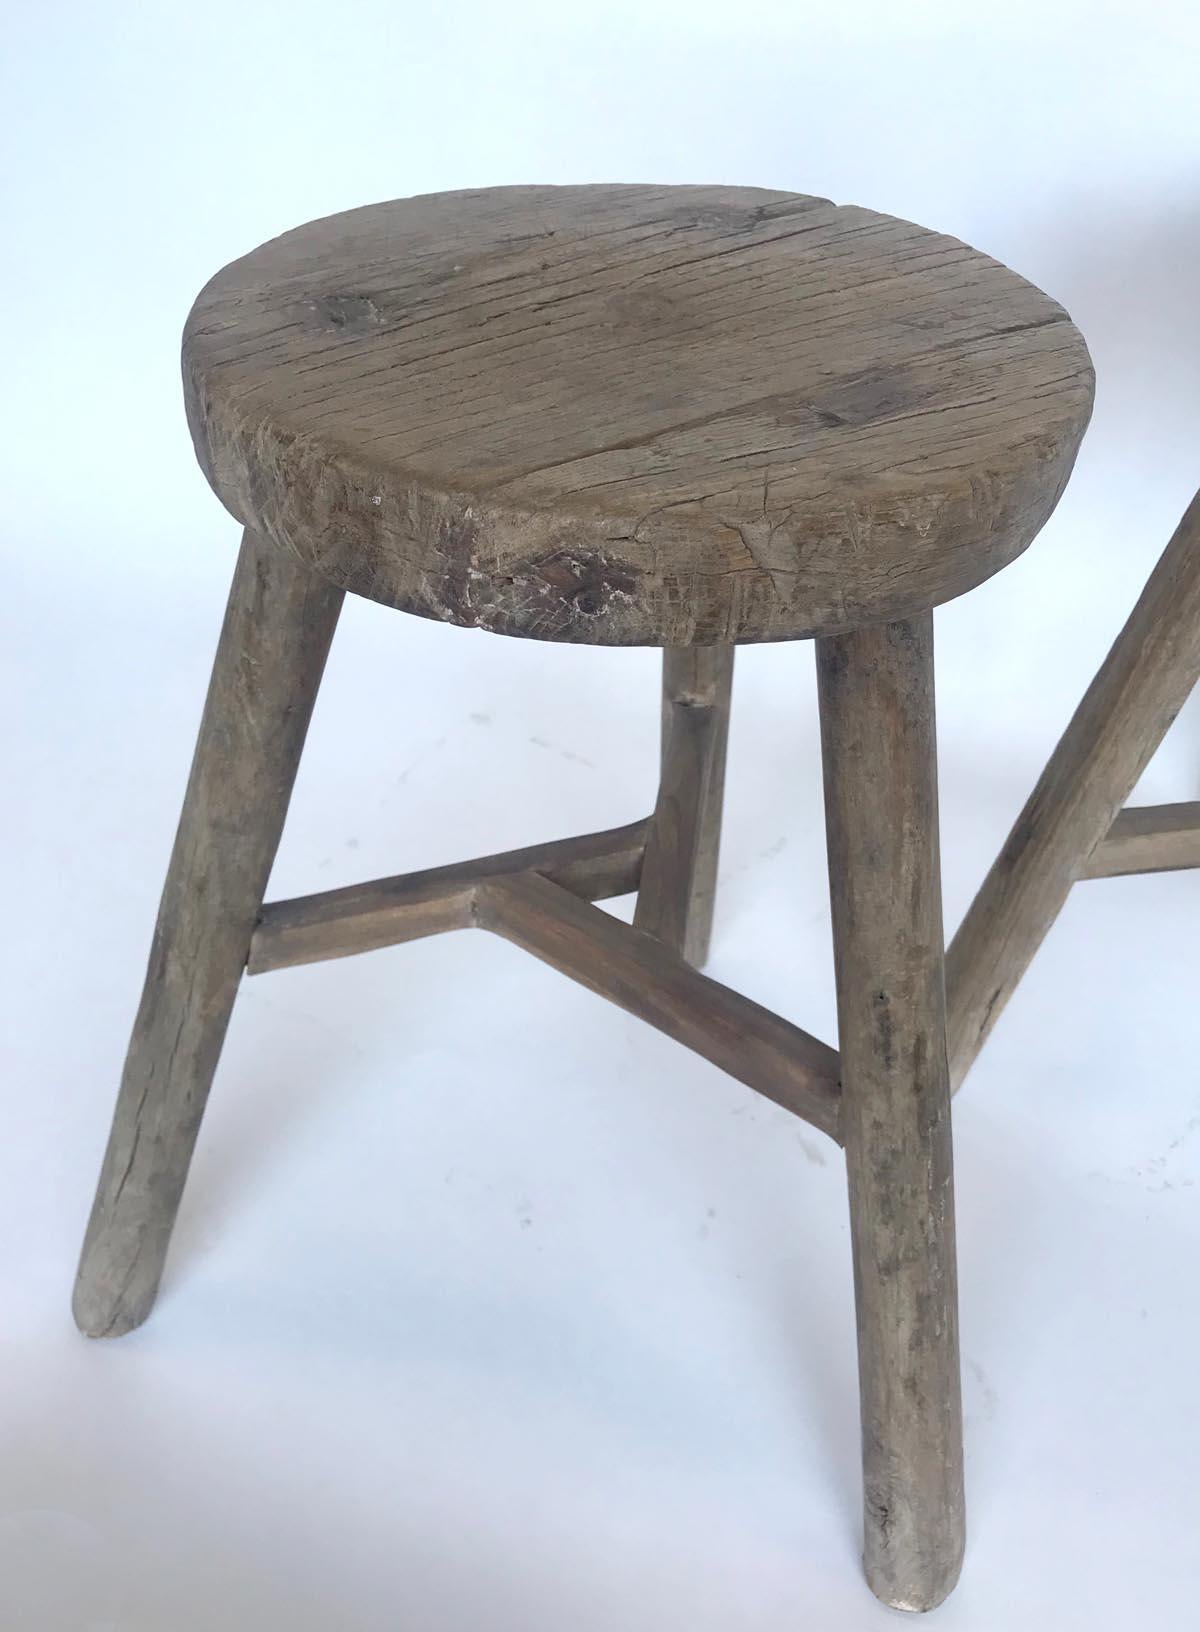 19th c. Chinese elm stools with various base configurations. Smooth, weathered, worn grey patina. Mortise and tenon joinery. Great for extra seating, a small side table or as a plant stand.
Sold separately, $785 each. Please refer to left, middle